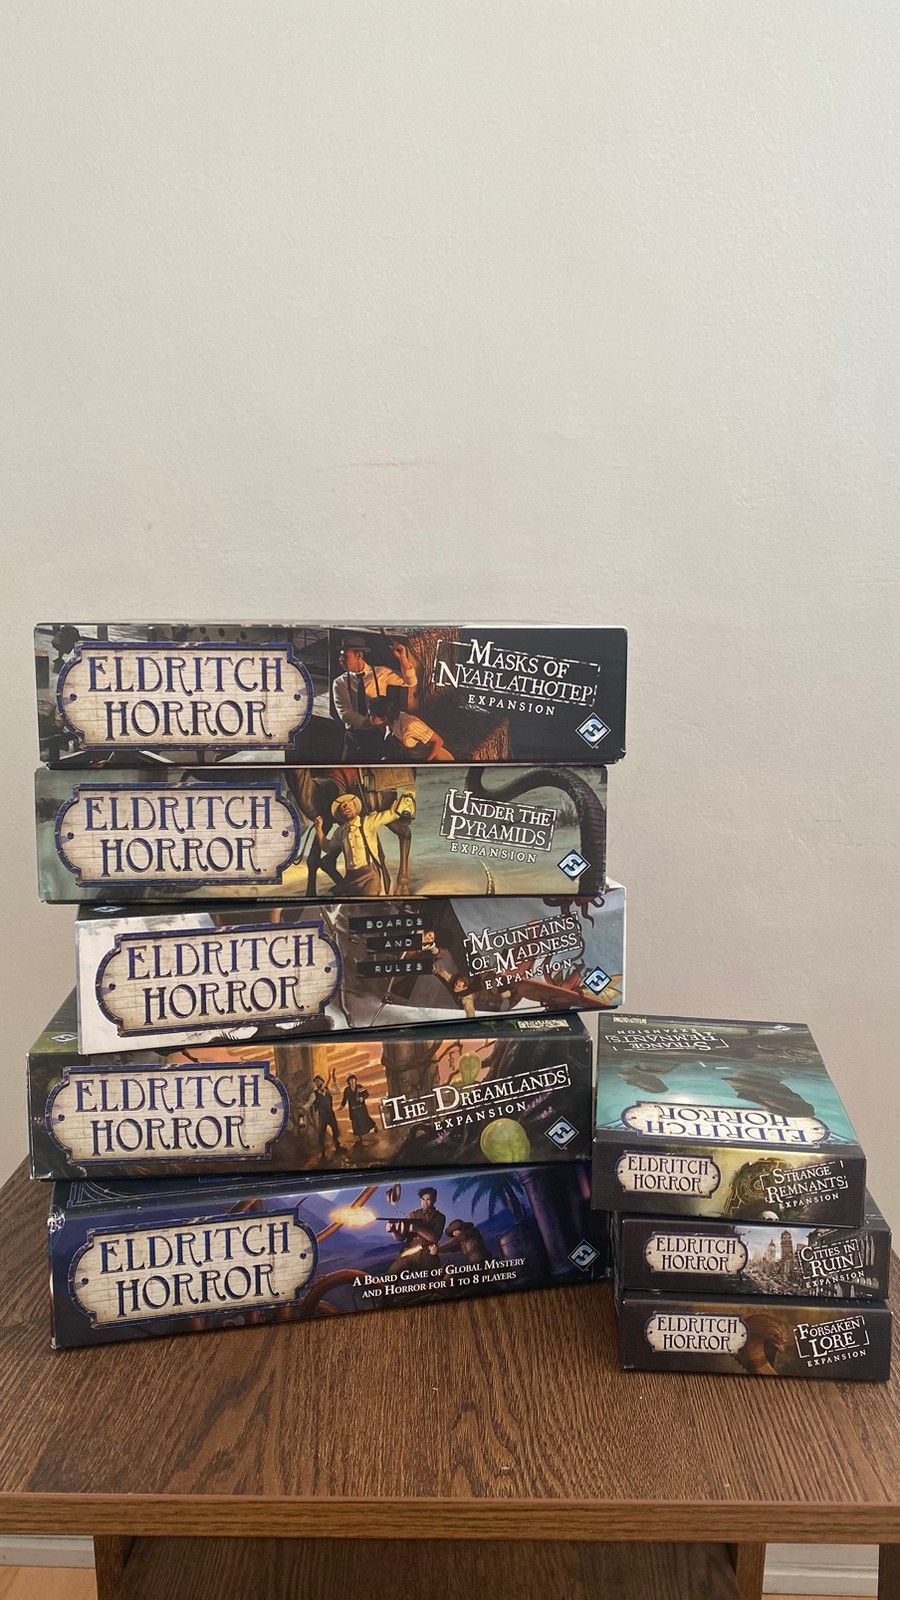 Eldritch Horror + 7 expansions